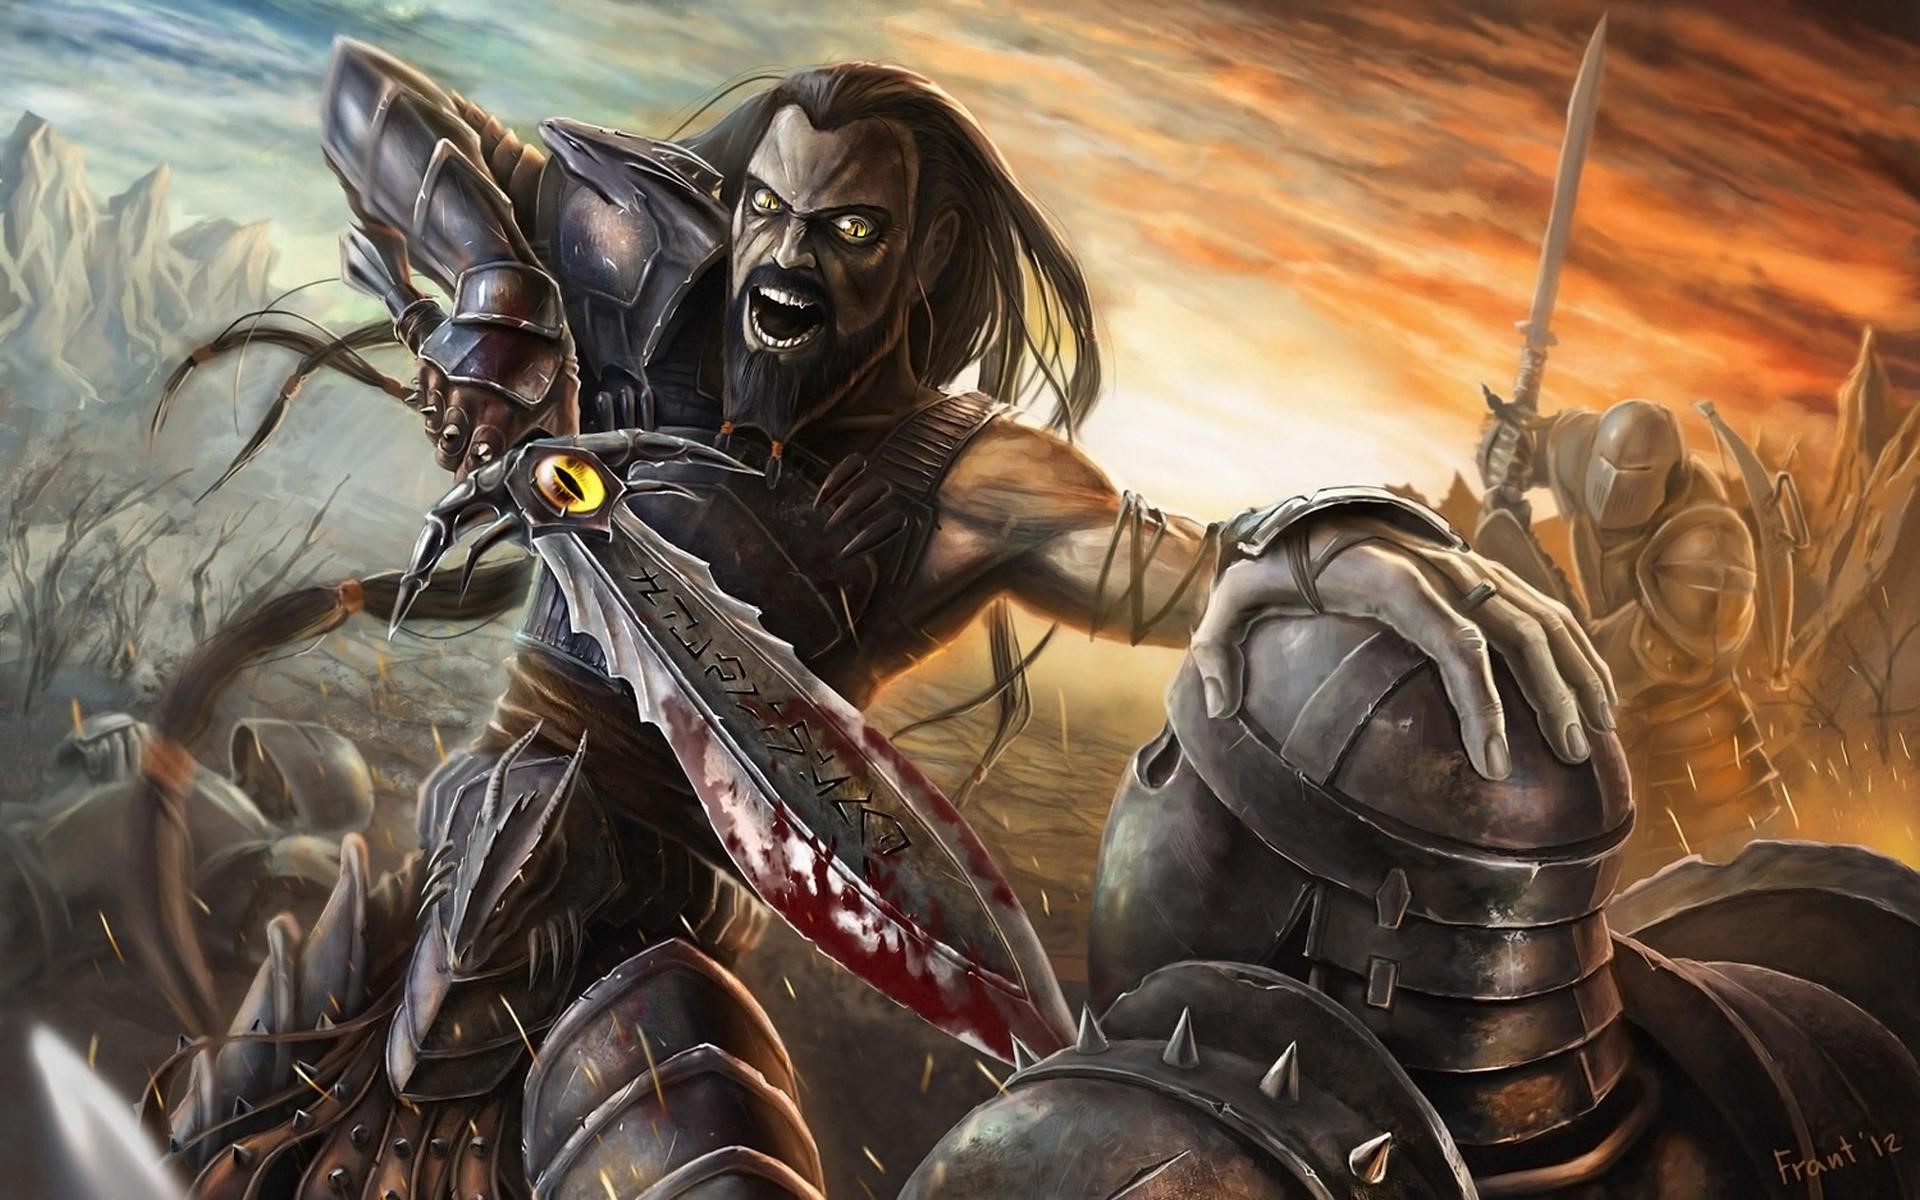 action game wallpaper,action adventure game,cg artwork,pc game,warlord,adventure game